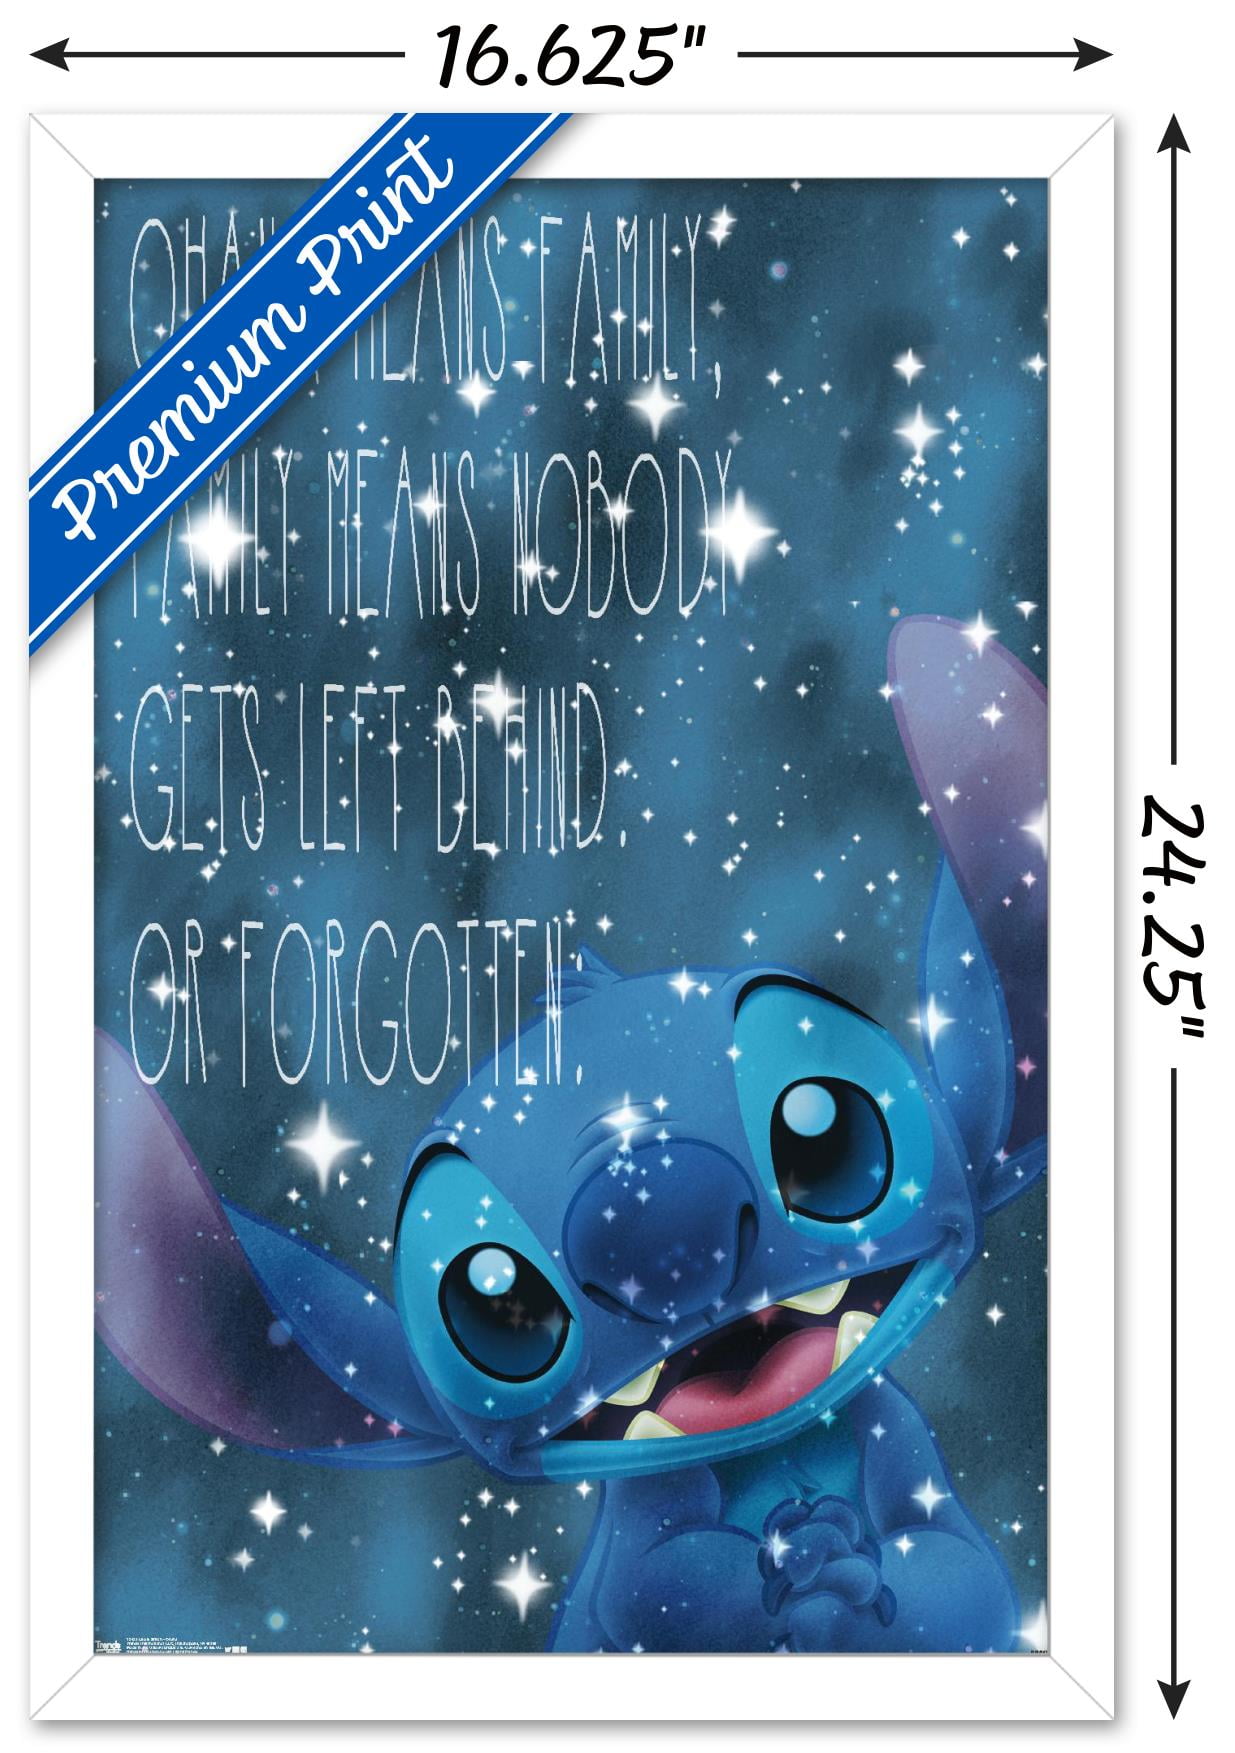 Drawings To Paint & Colour Lilo And Stitch - Print Design 009